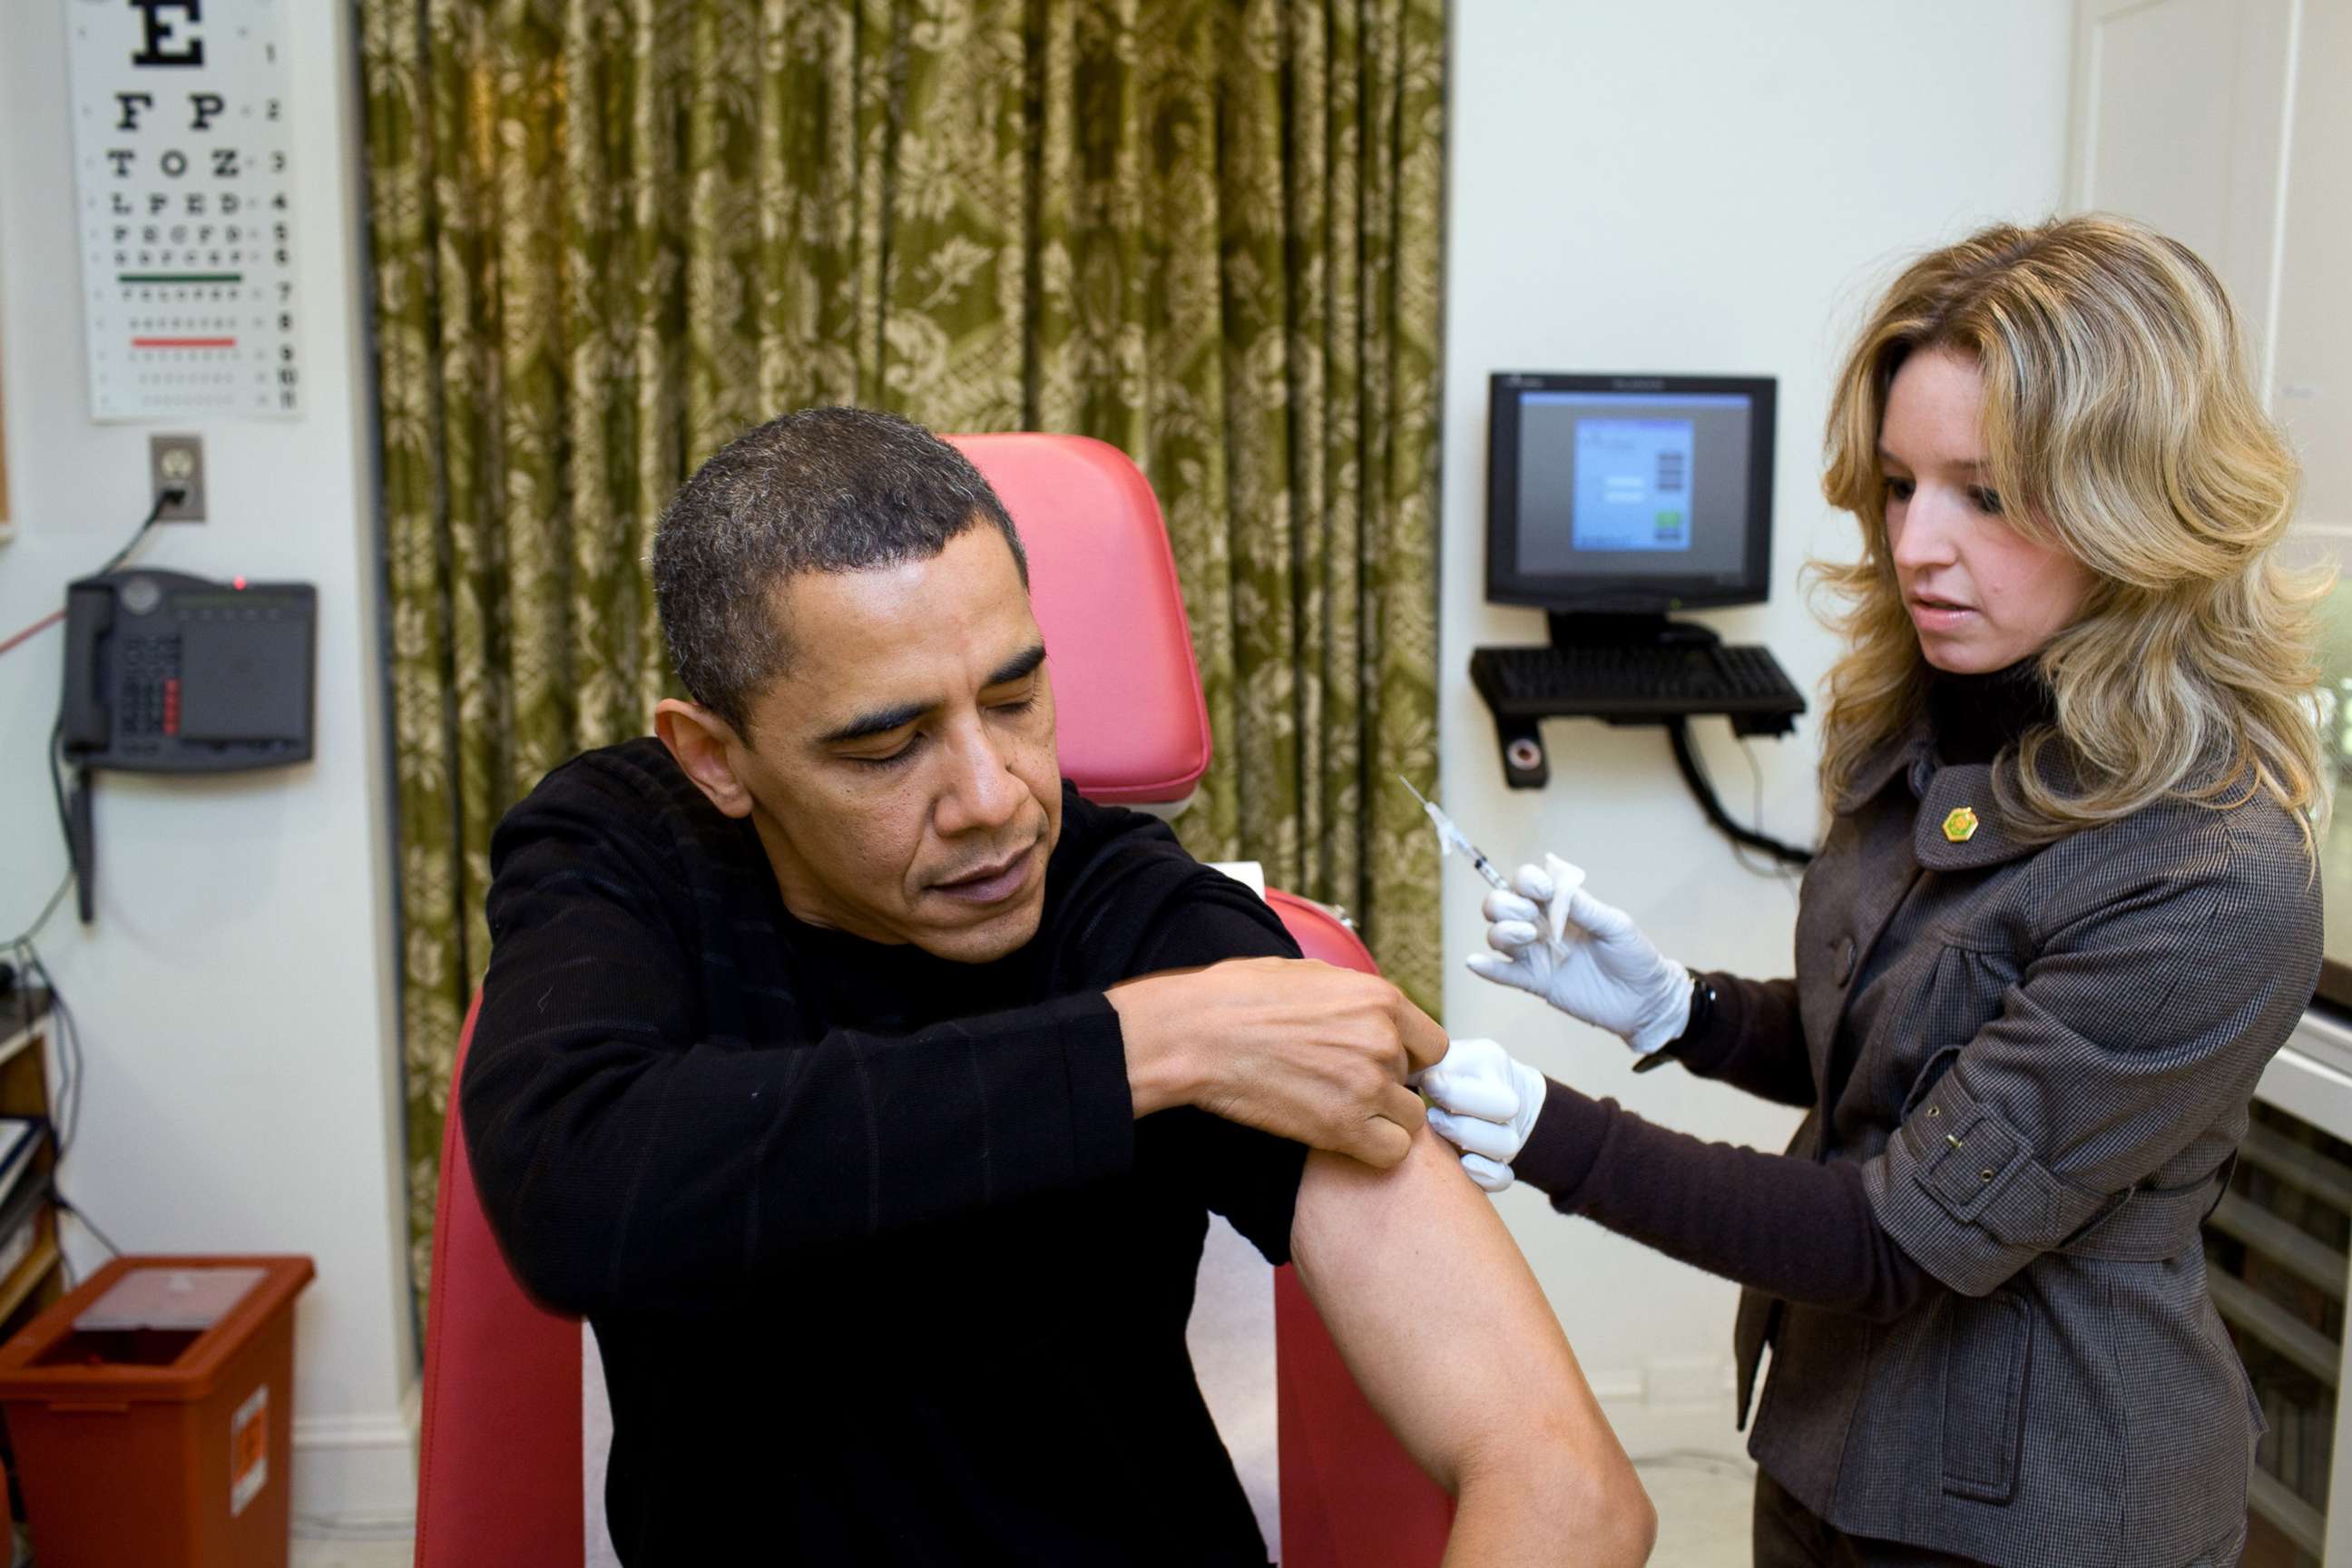 PHOTO: A nurse prepares to administer the H1N1 vaccine to President Barack Obama at the White House, Dec. 20, 2009, in Washington, D.C.